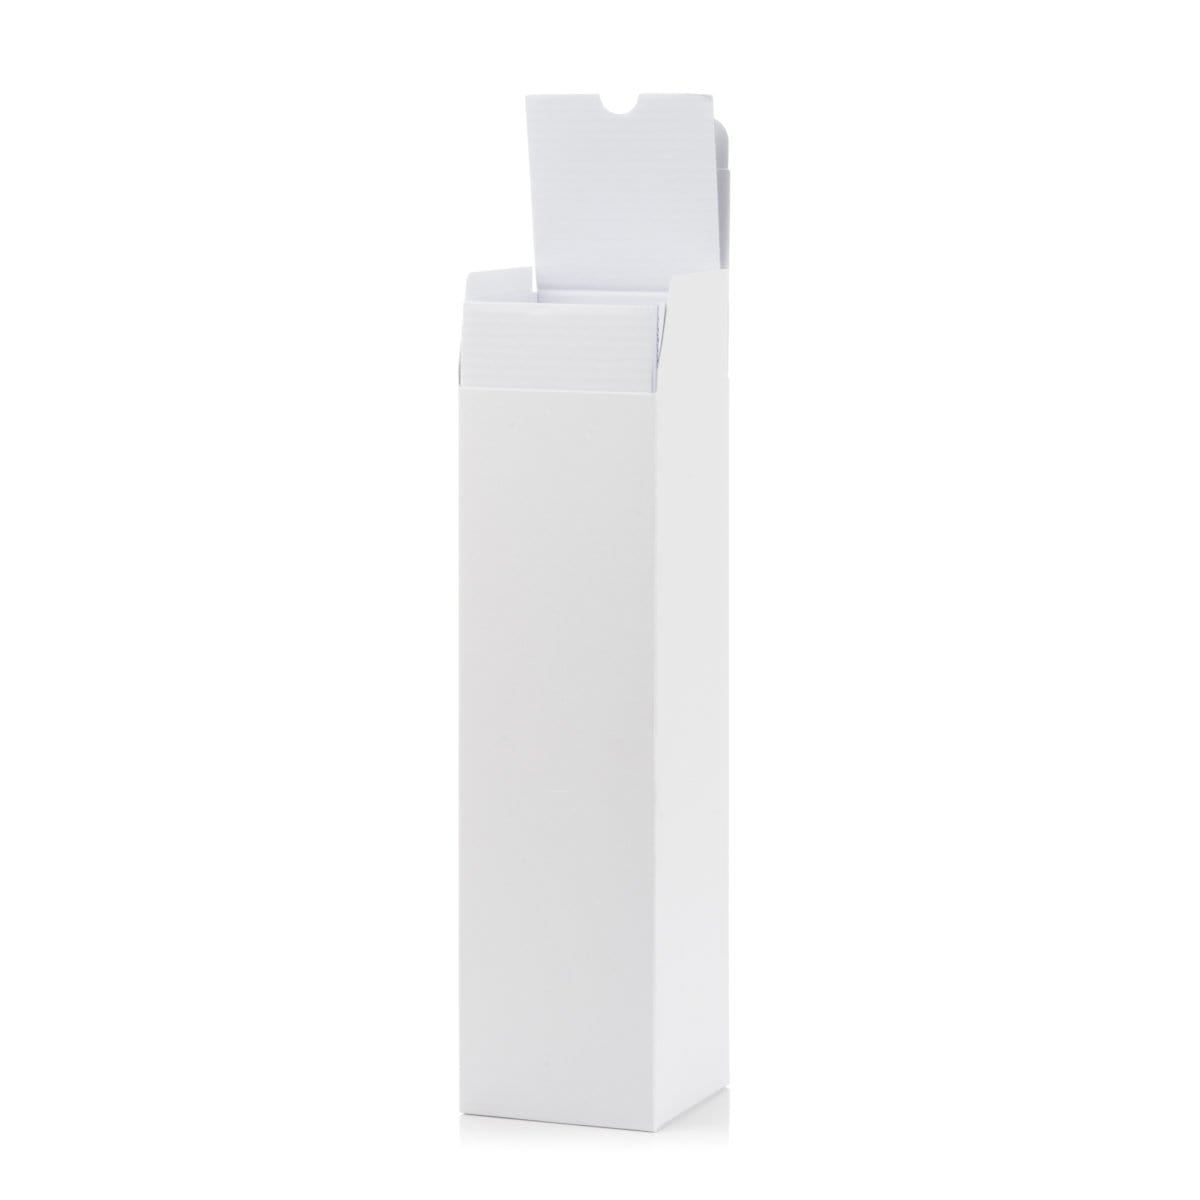 Candle Shack Diffuser Box Luxury Folding Box & Liner for 100ml Diffuser - White